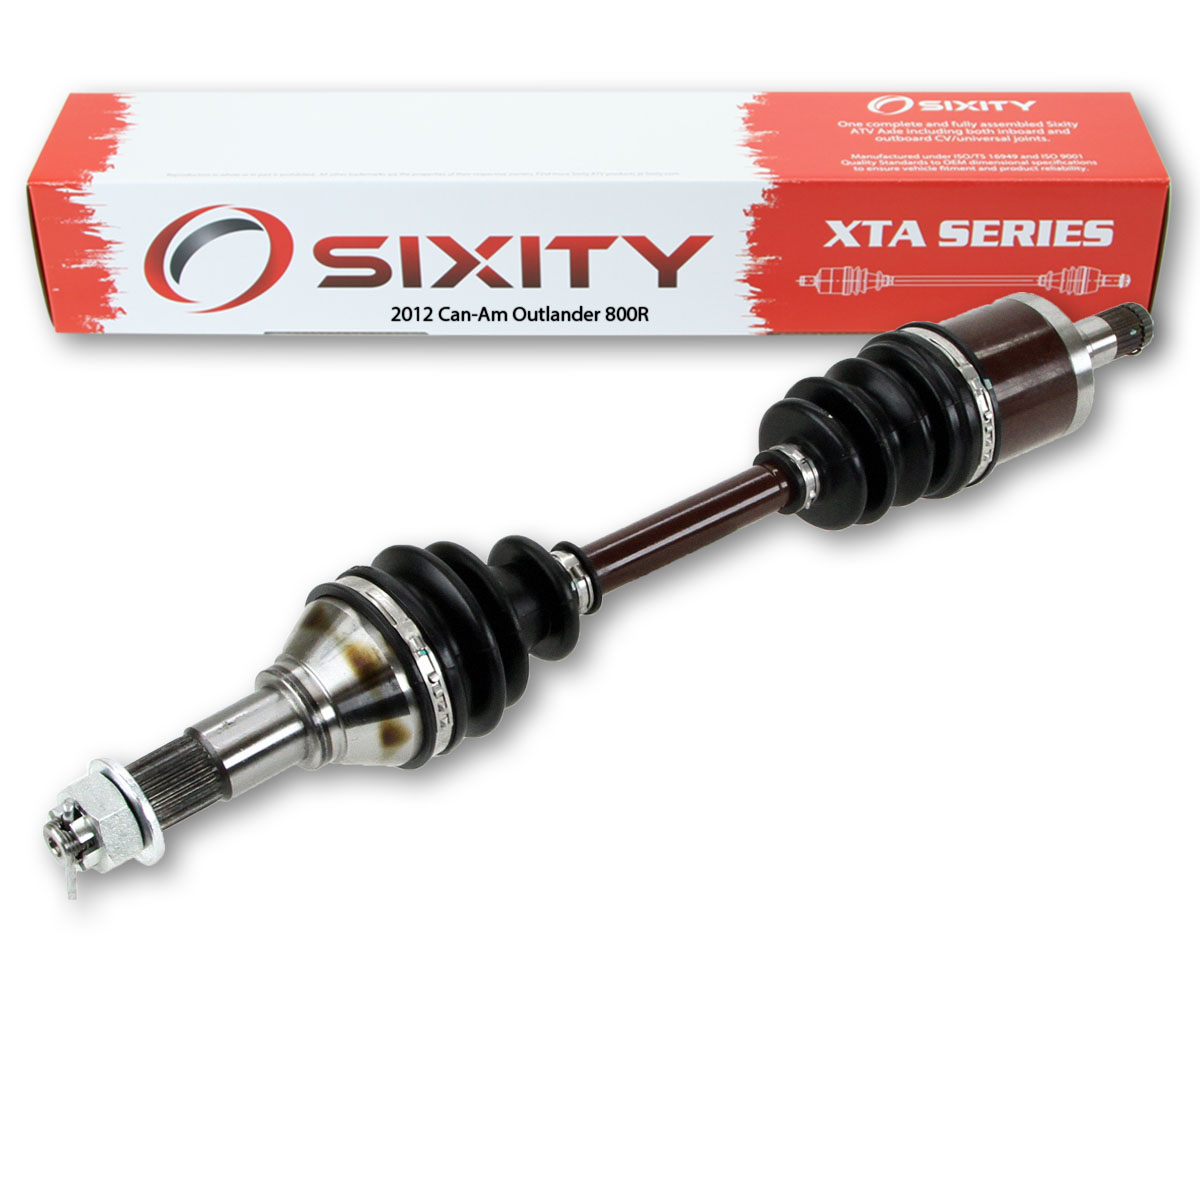 Sixity 2012 Can-Am Outlander 800R 4X4 Front Left XTA ATV Axle